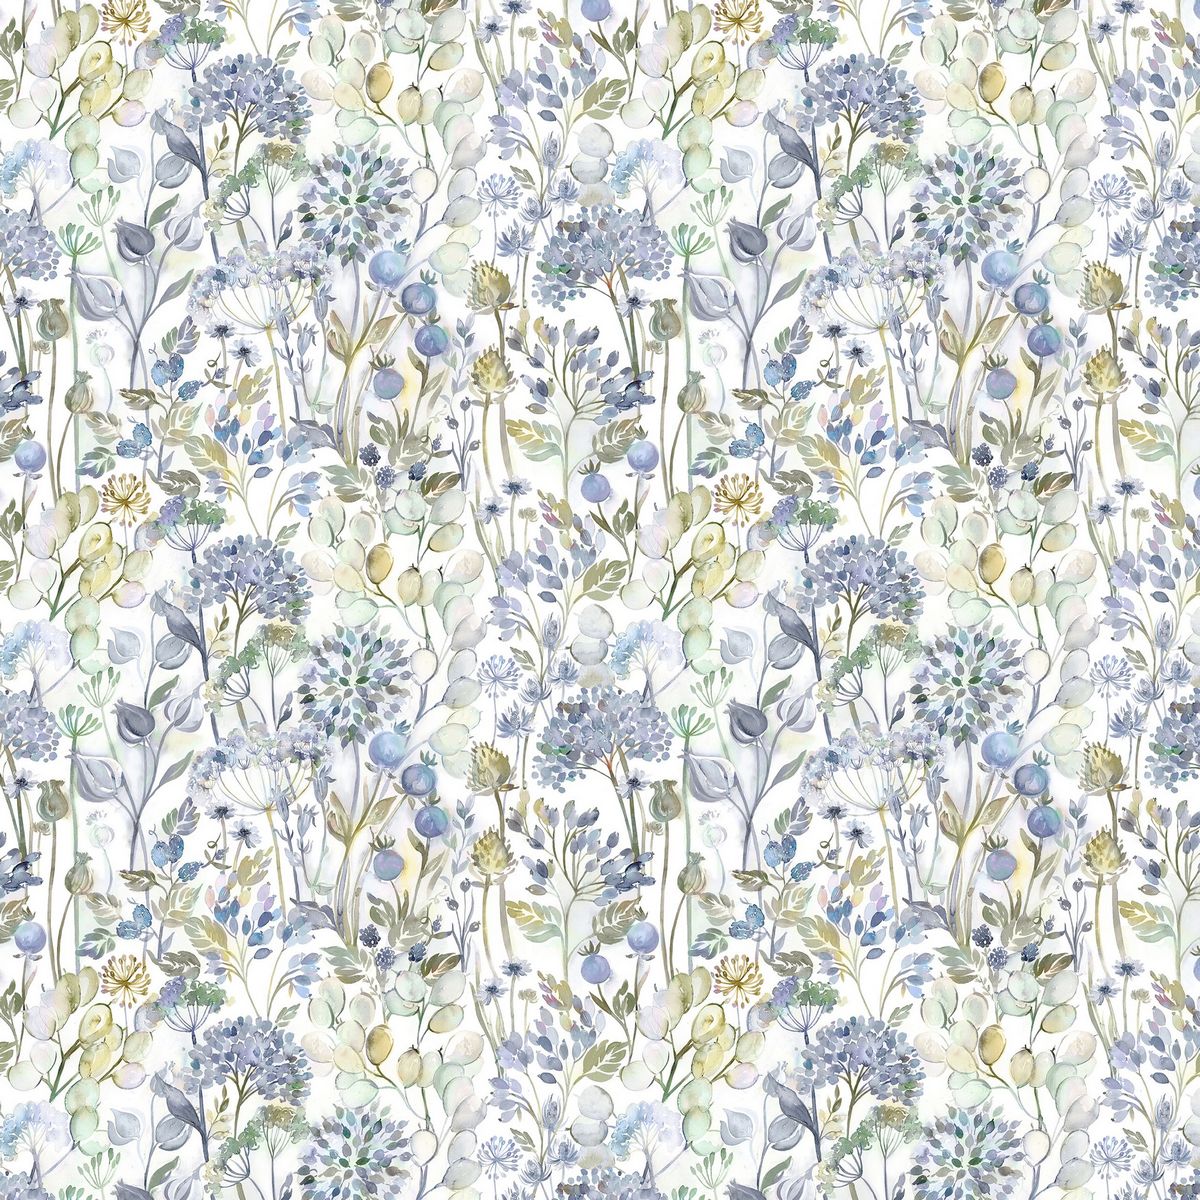 Country Hedgerow Crocus Fabric by Voyage Maison